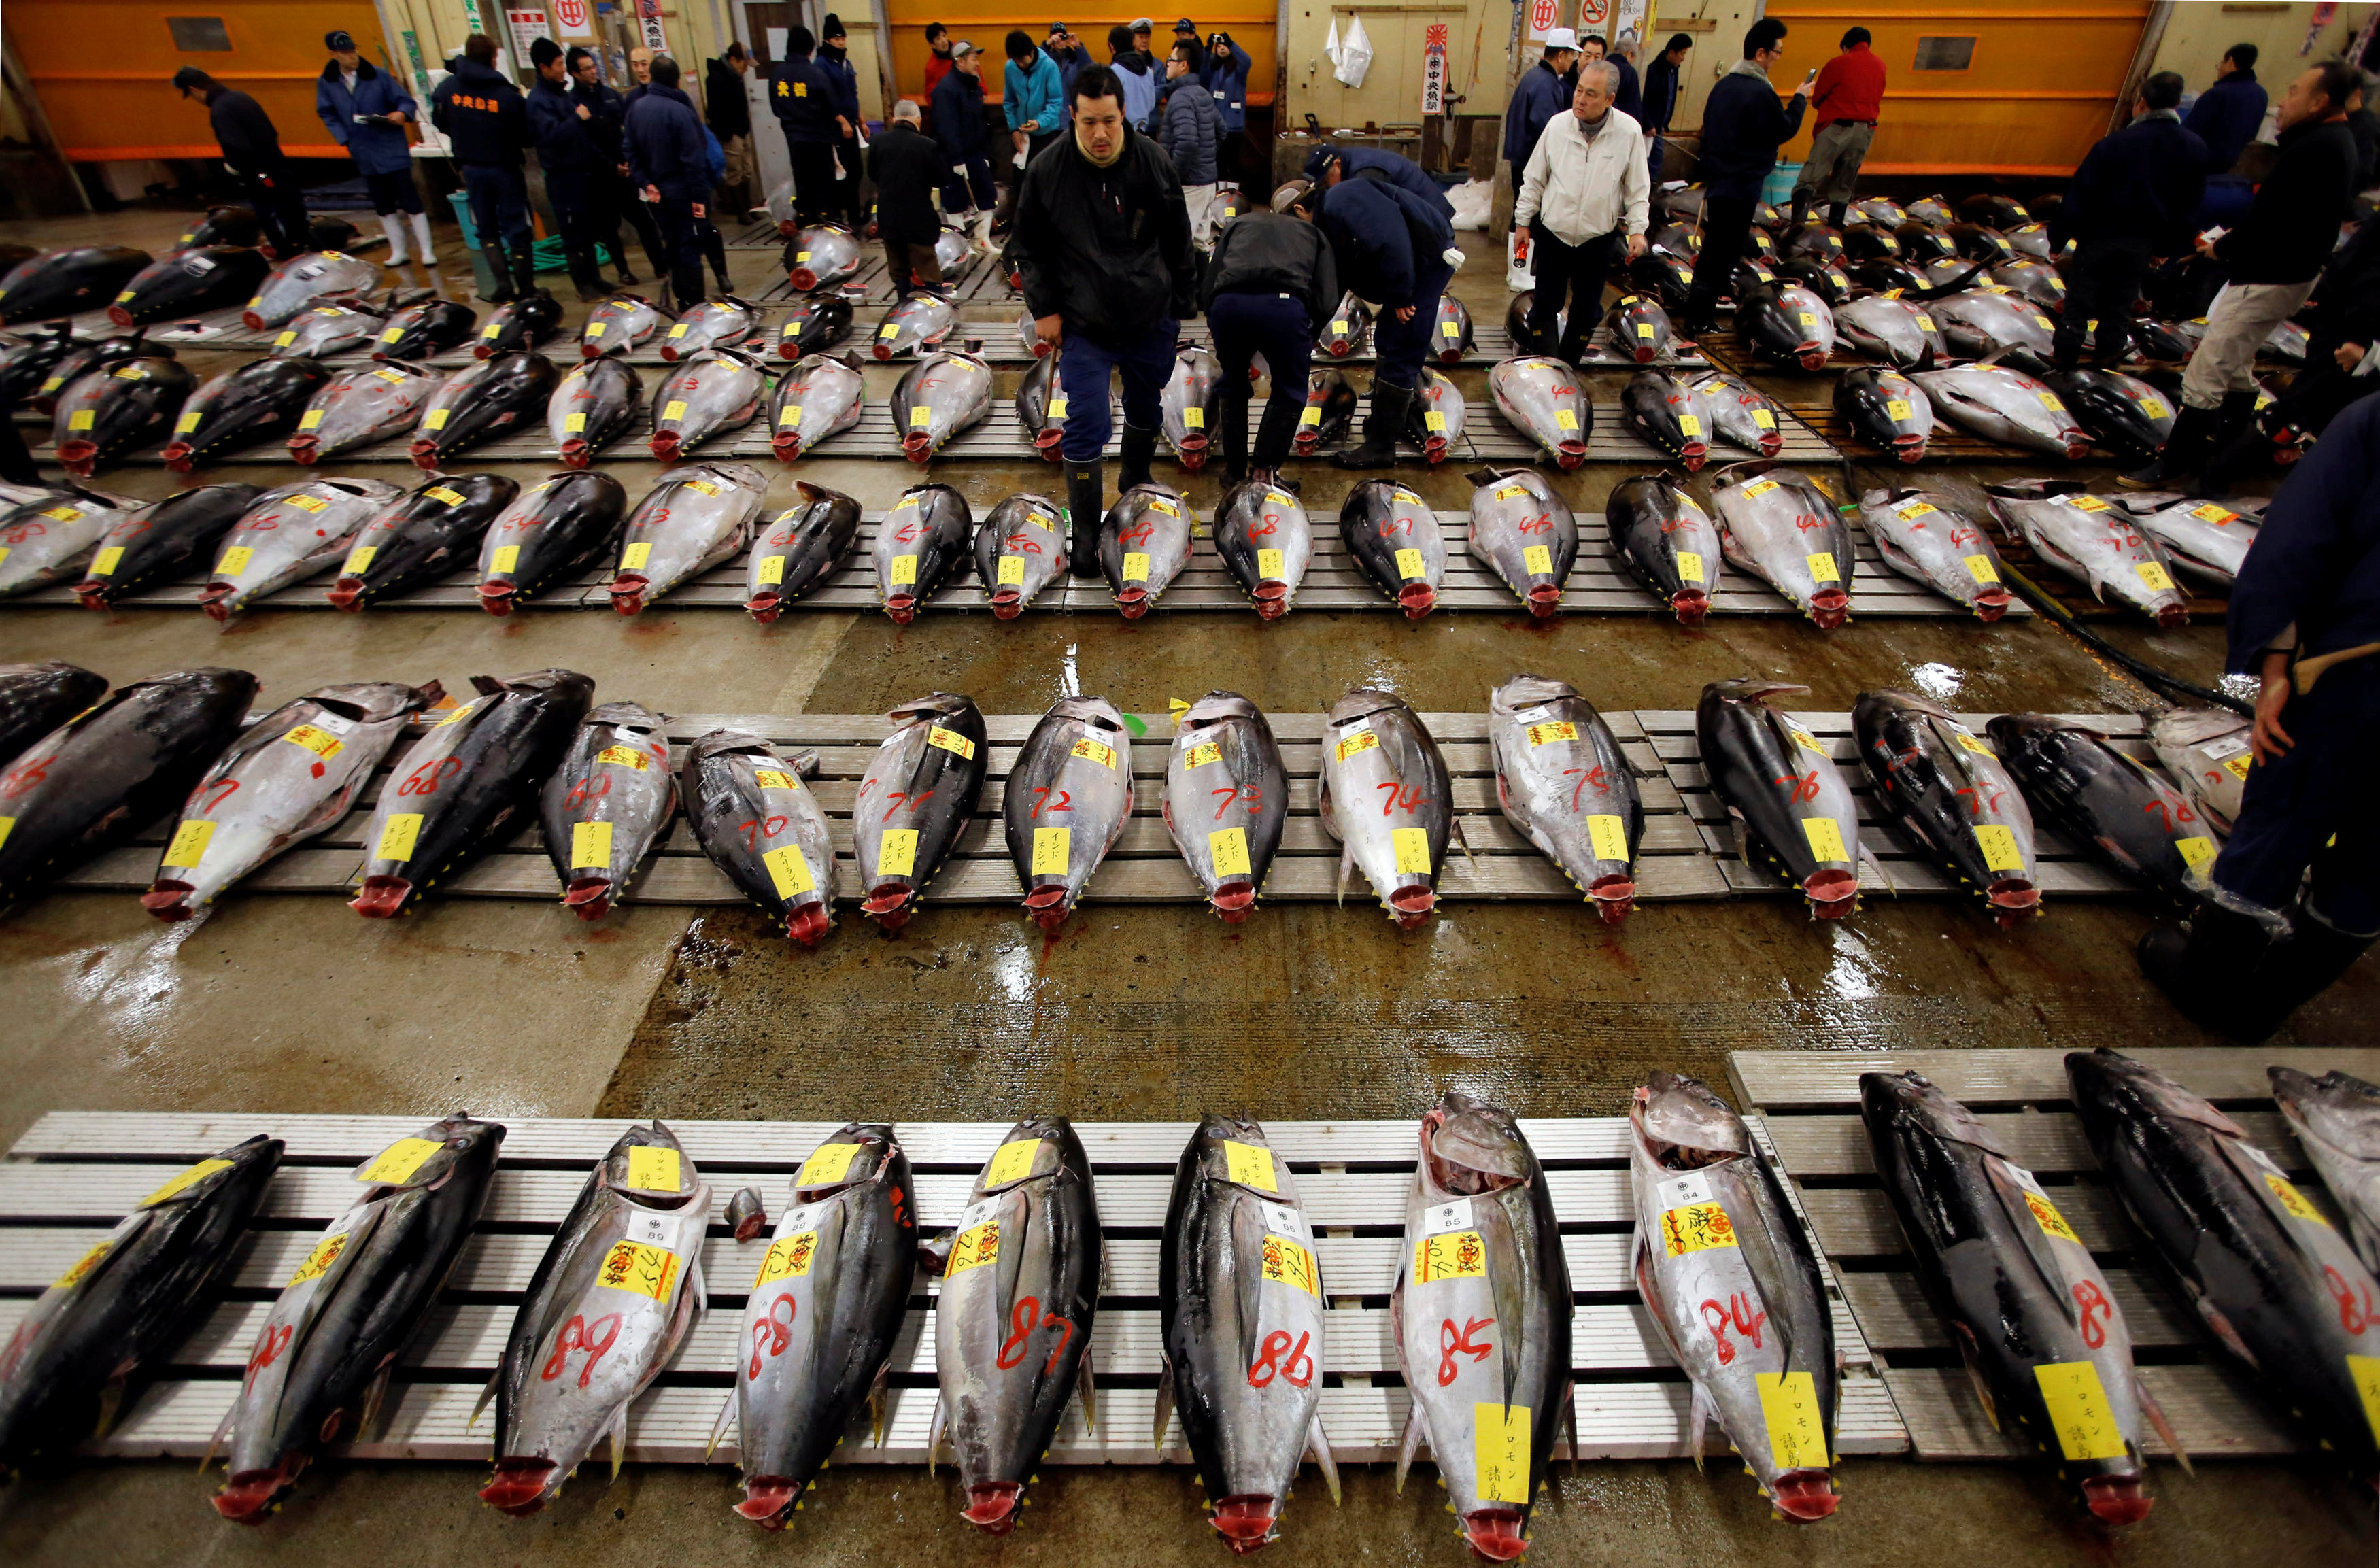 Wholesalers survey tuna at the Tsukiji fish market in Tokyo before the New Year's auction on Jan. 5. The plan to relocate the market in November will reportedly be postponed. | REUTERS